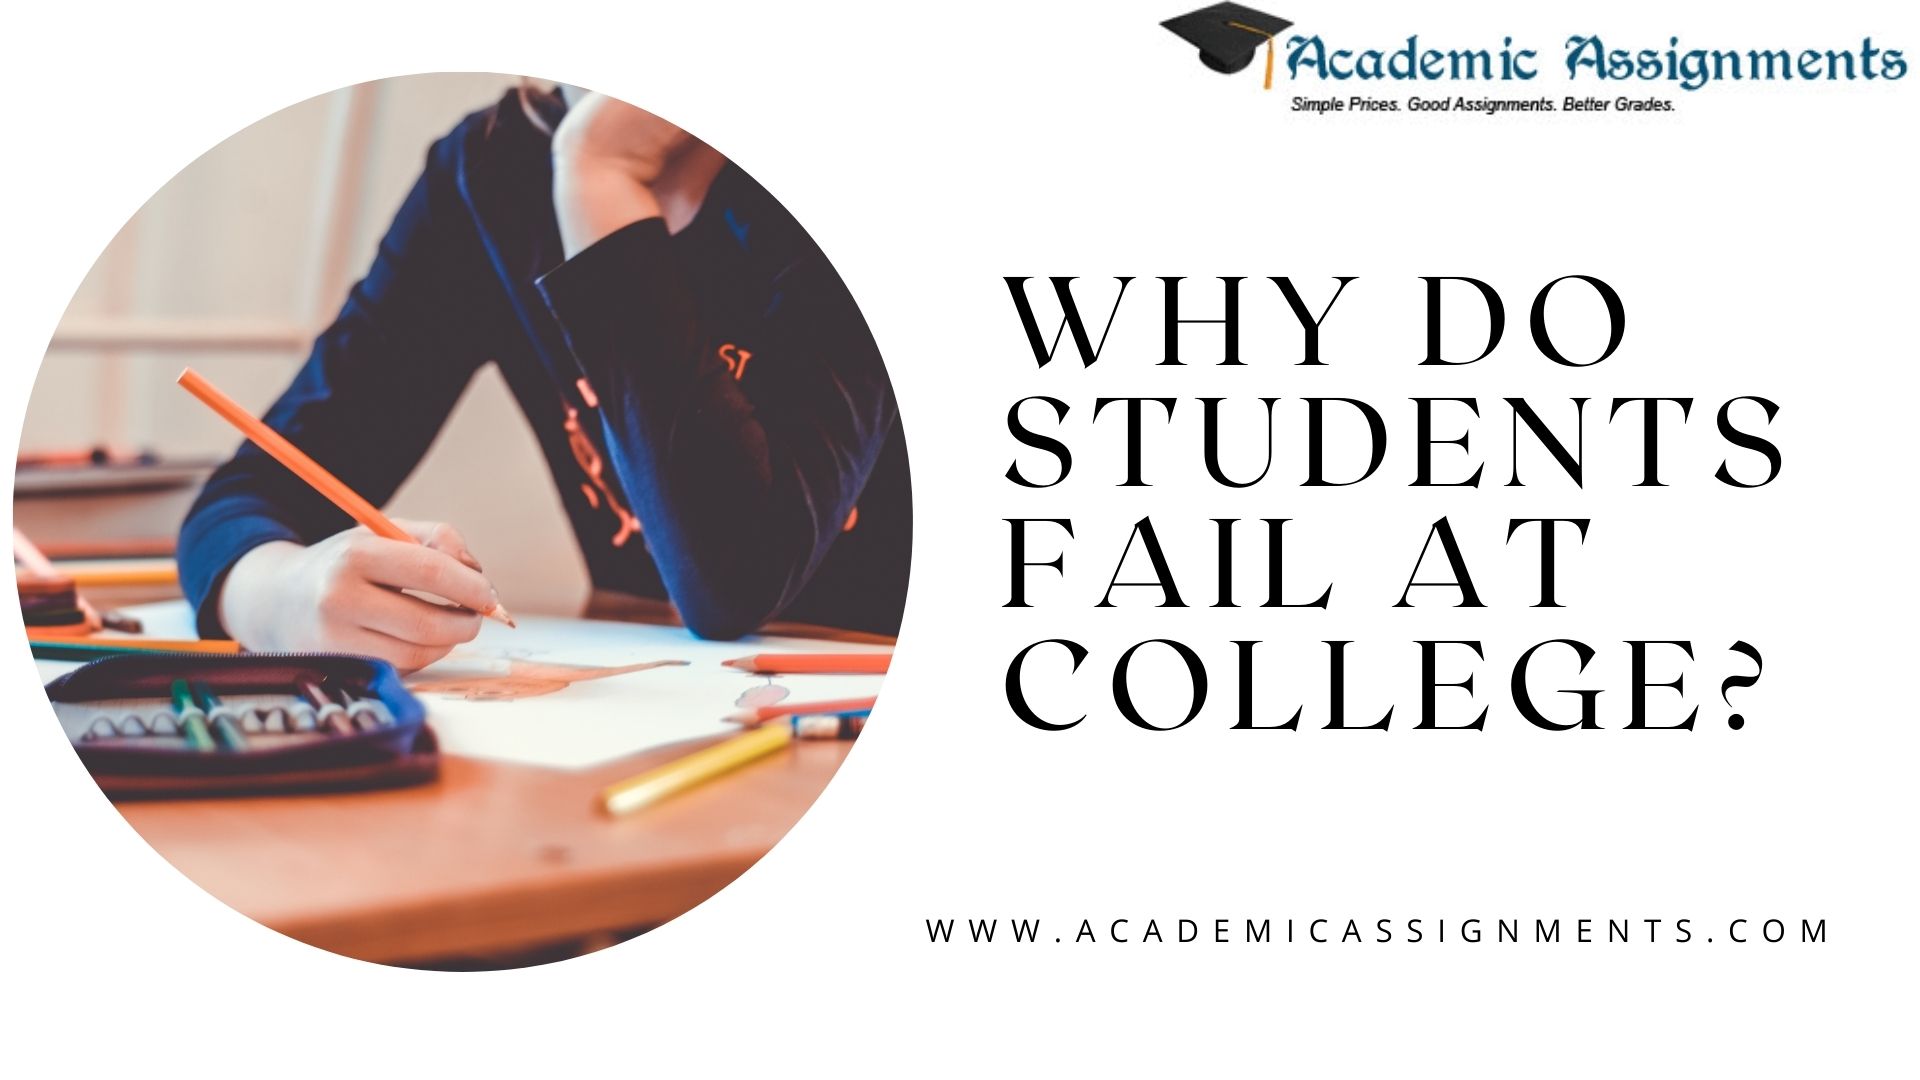 WHY DO STUDENTS FAIL AT COLLEGE